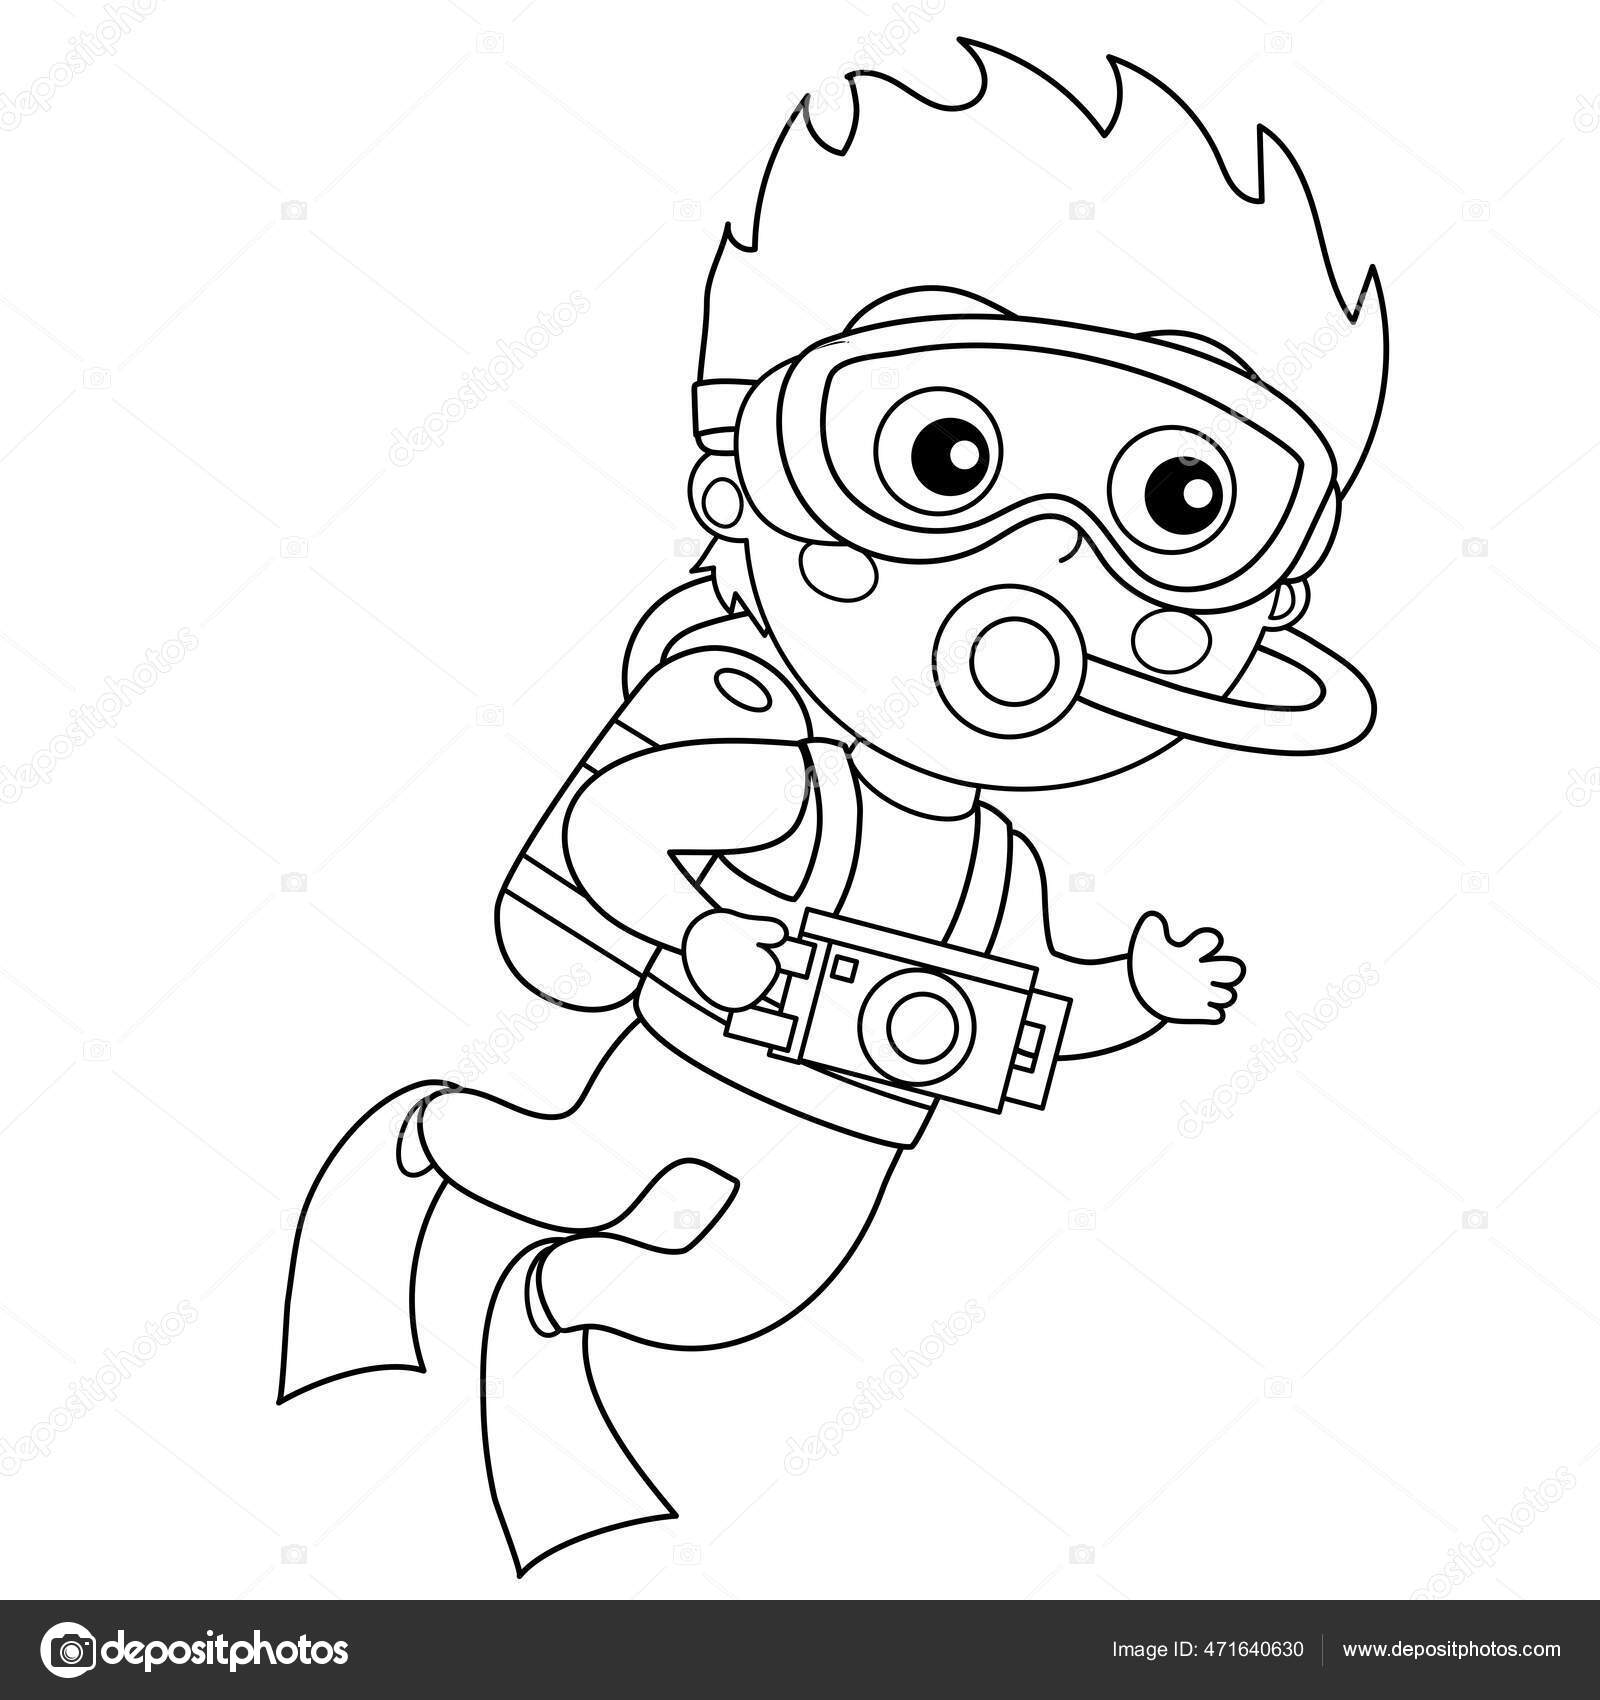 Coloring page outline cartoon little boy scuba diver marine photography stock vector by oleon